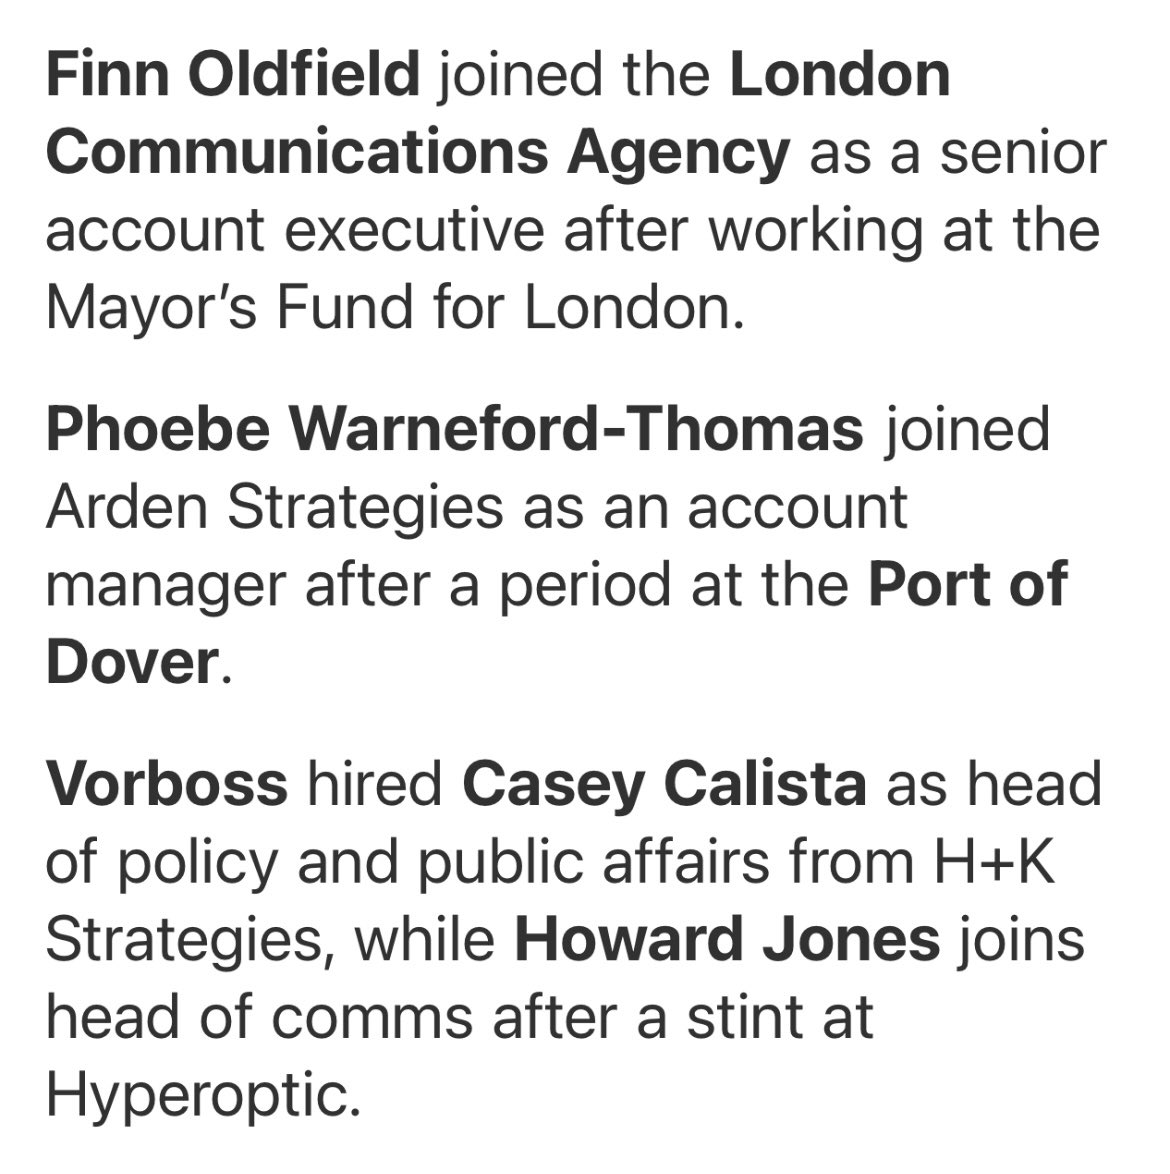 🚨Personal news klaxon! Always a treat to make it into @POLITICOEurope as I start my new role as Senior Account Executive @LDNcomms in the Politics, Engagement & Planning team. The built environment will be a key policy area in the run up 2 #GE24 & I can’t wait to get stuck in!